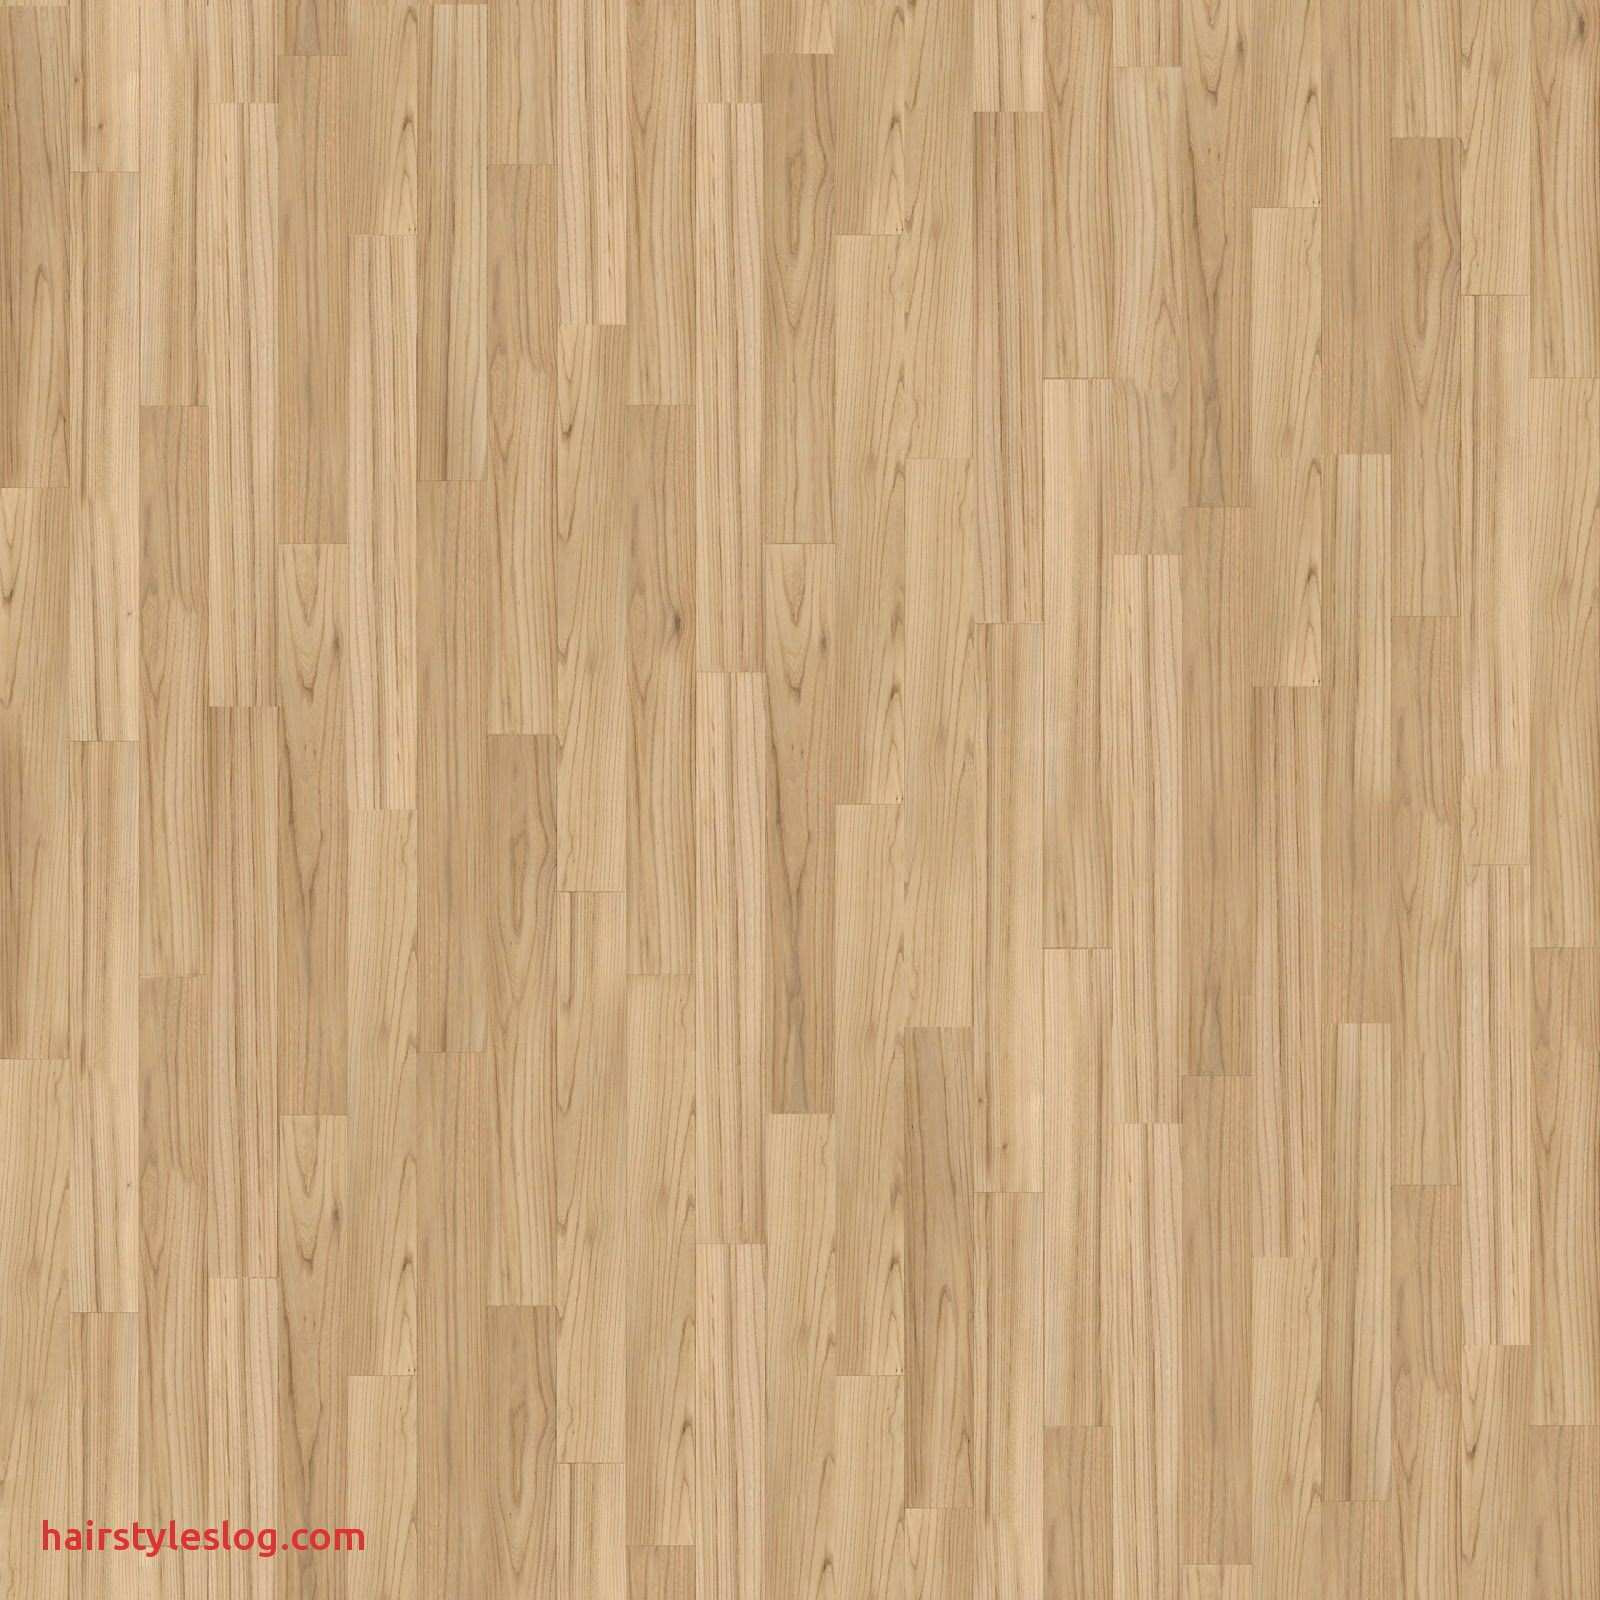 30 Elegant Hardwood Floor Texture 2024 free download hardwood floor texture of neutral wood floor texture sketchup with regard to the house within cottage wood floor texture sketchup for household designs simo 3d com texture seamless parquet r